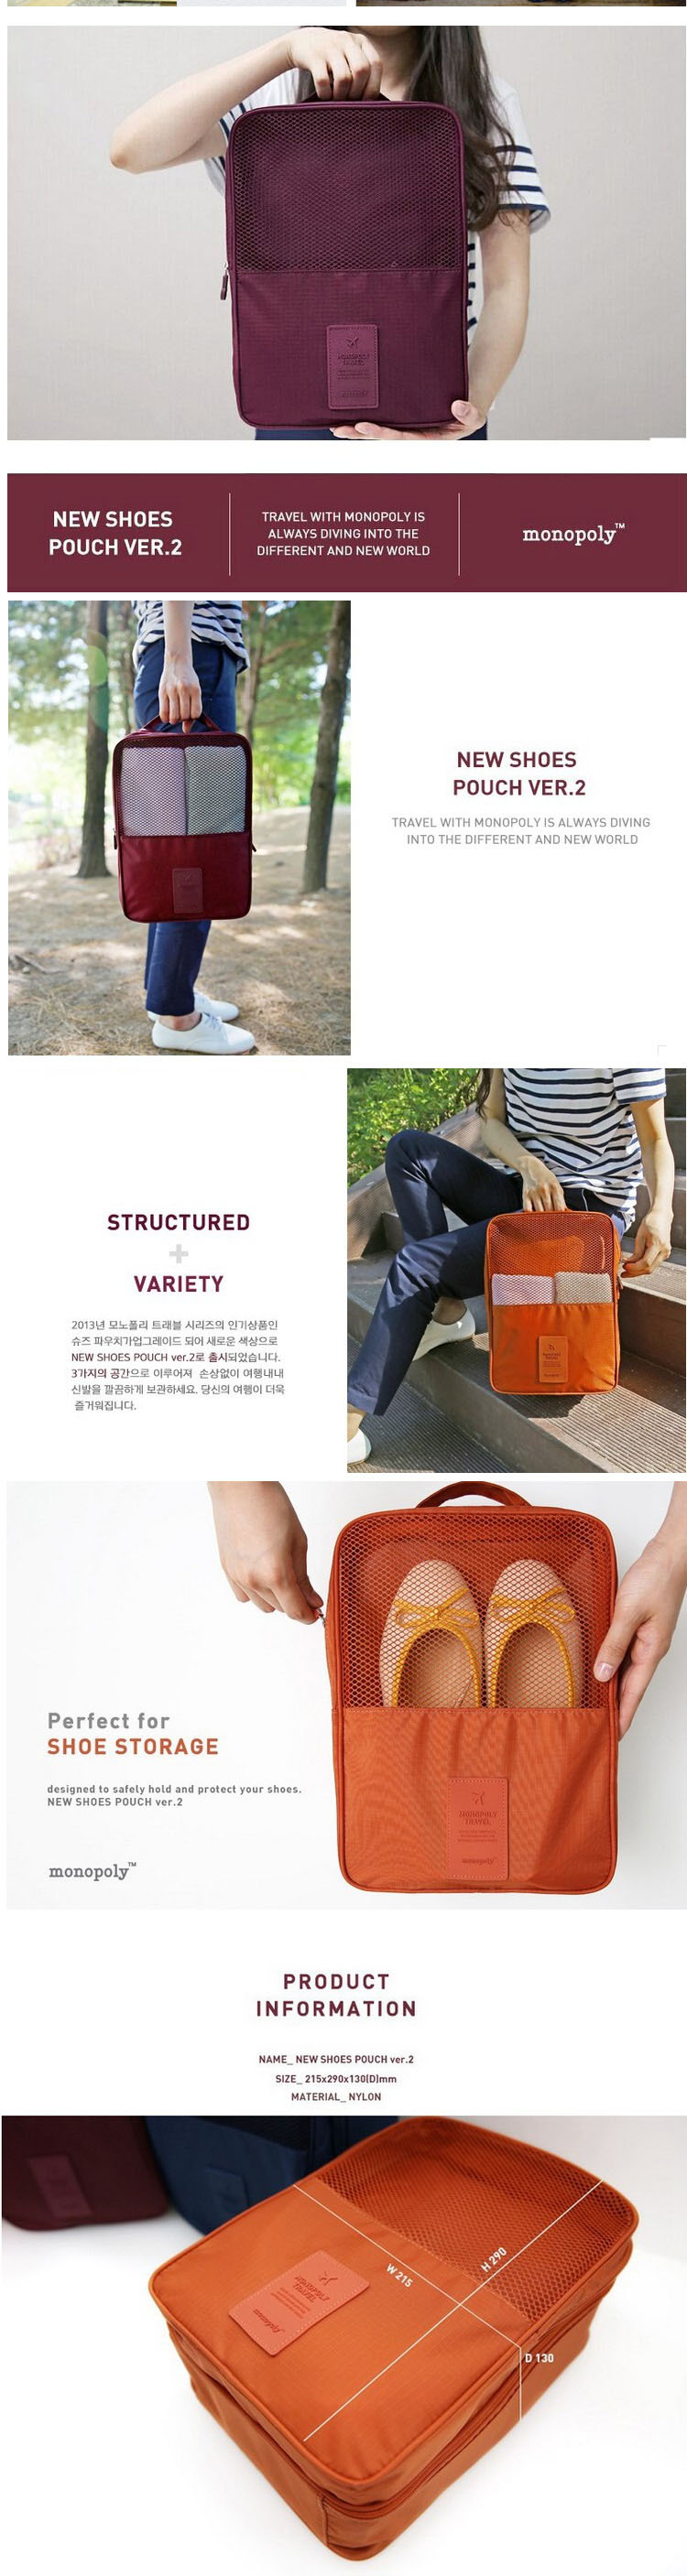 Traveling and receiving bags, packing shoes and shoes bag travel necessary luggage suitcase waterproof shoe bag shoe box three generation shoe bag5